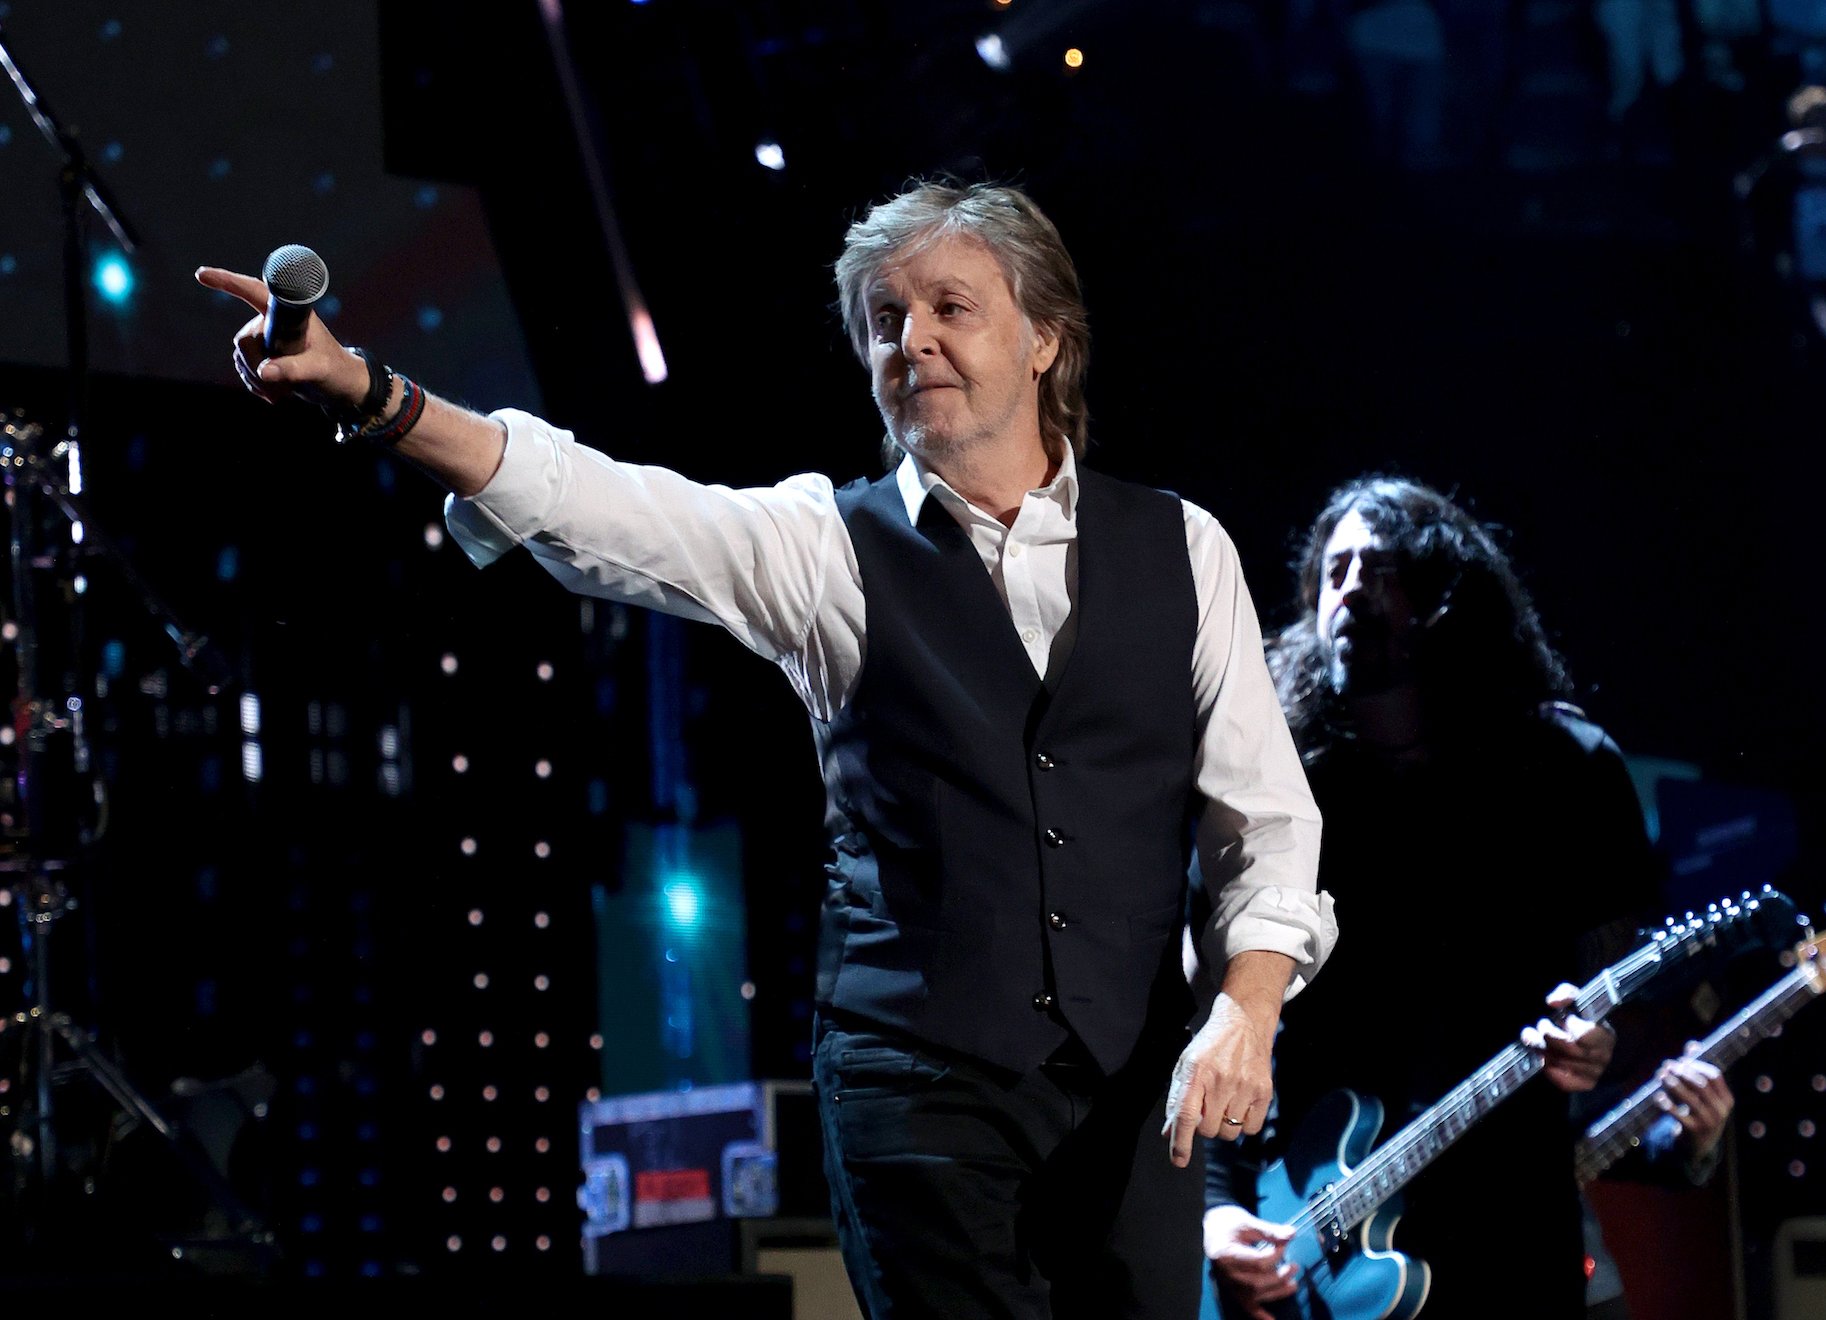 Paul McCartney performs at the 36th annual Rock and Roll Hall of Fame induction Ceremony